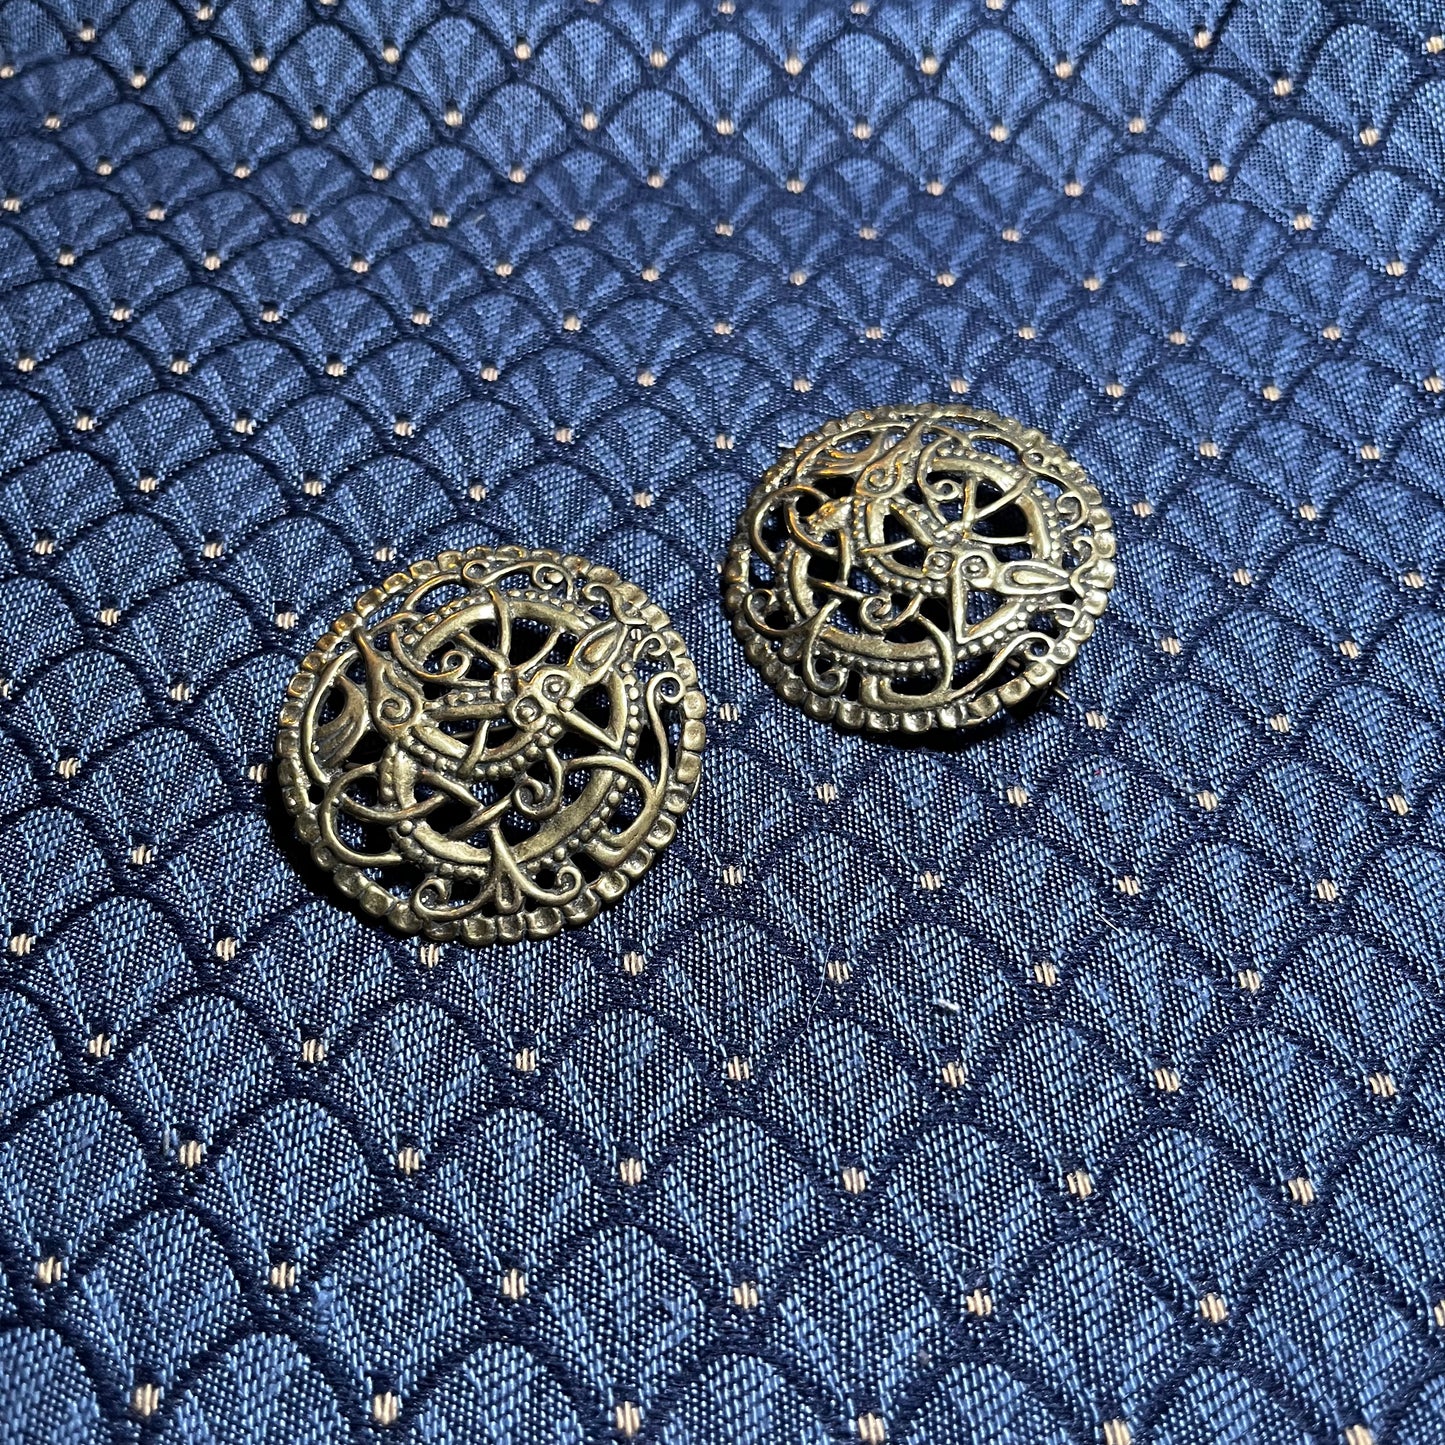 5 cm Viking Disc Urnes-style Brooches (set of 2) - Replica of Pitney Brooch